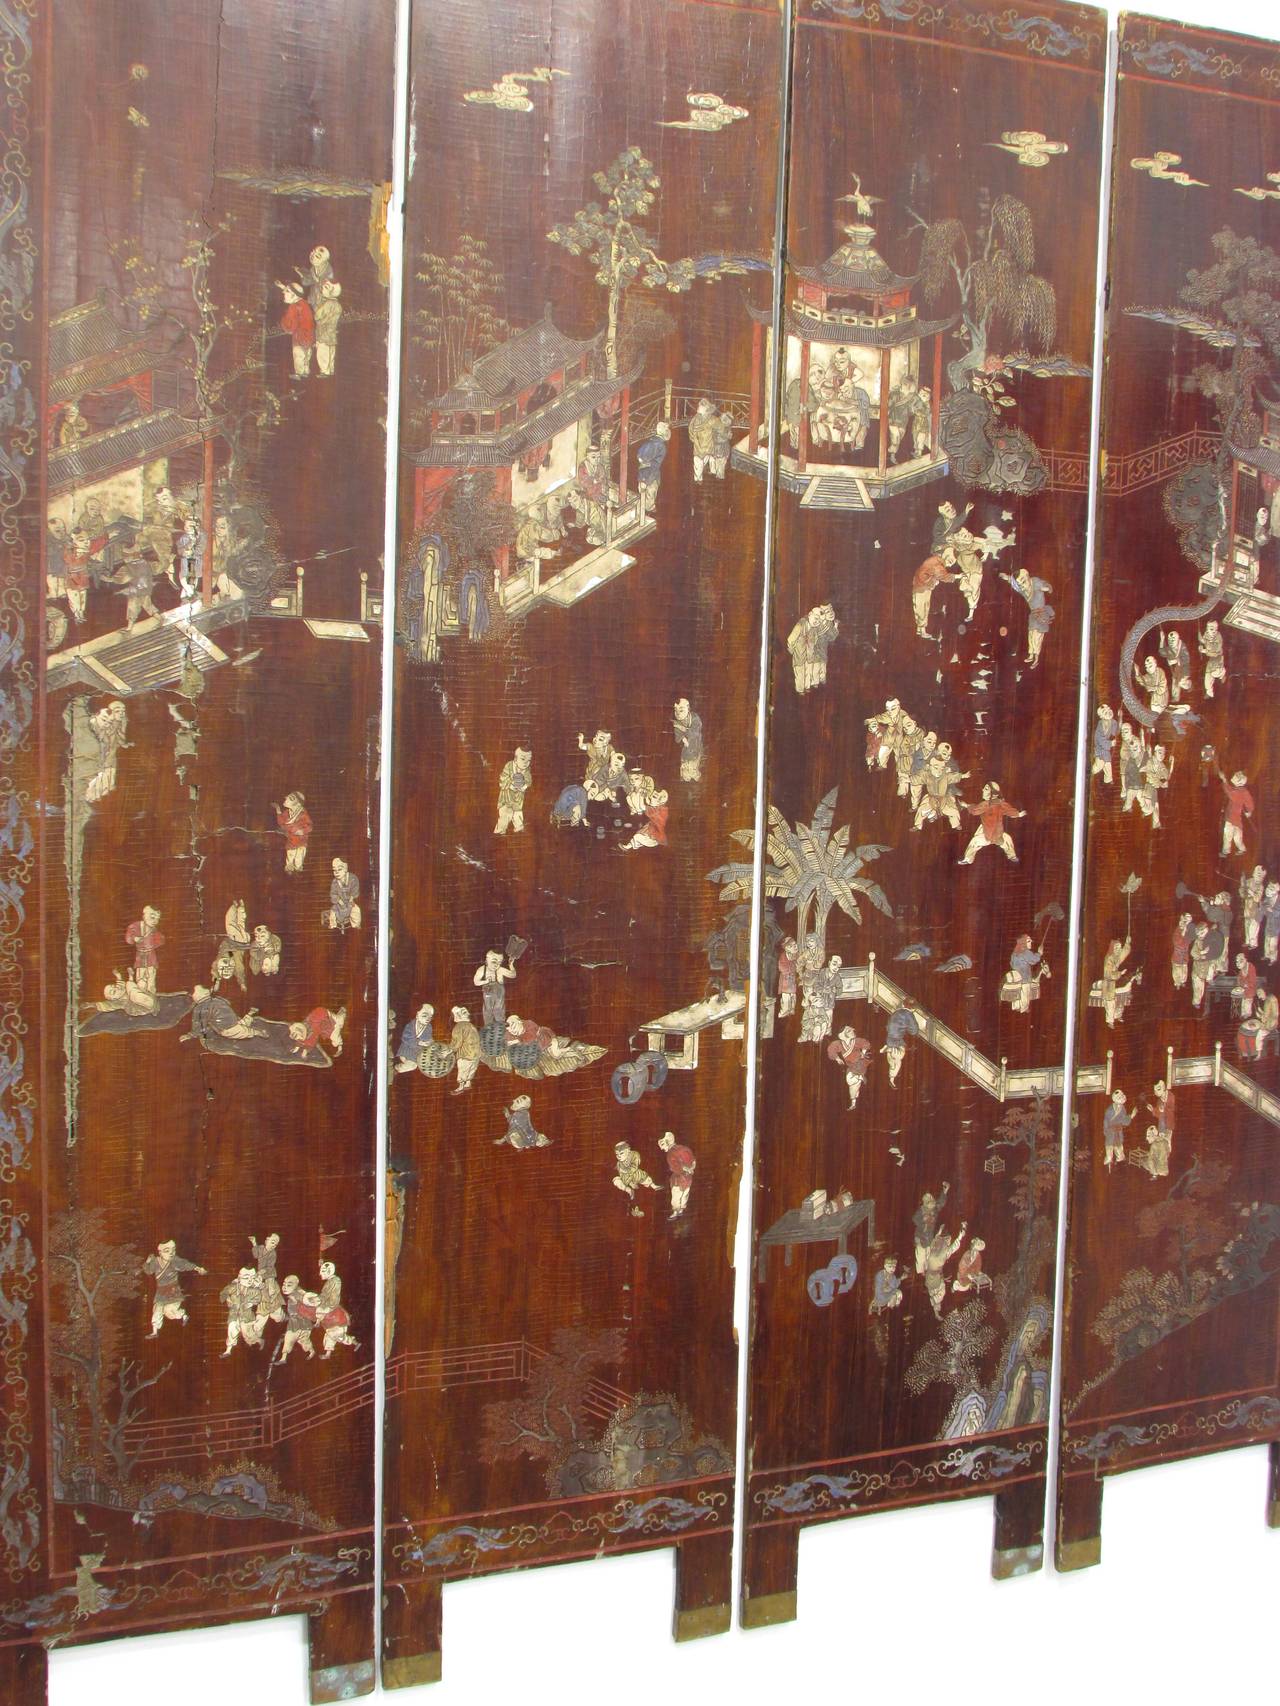 Four-panel brown lacquered coromandel folding screen depicting kids engaged in various games and activities screen is very worn and weathered and now disassembled and mounted as wall piece.